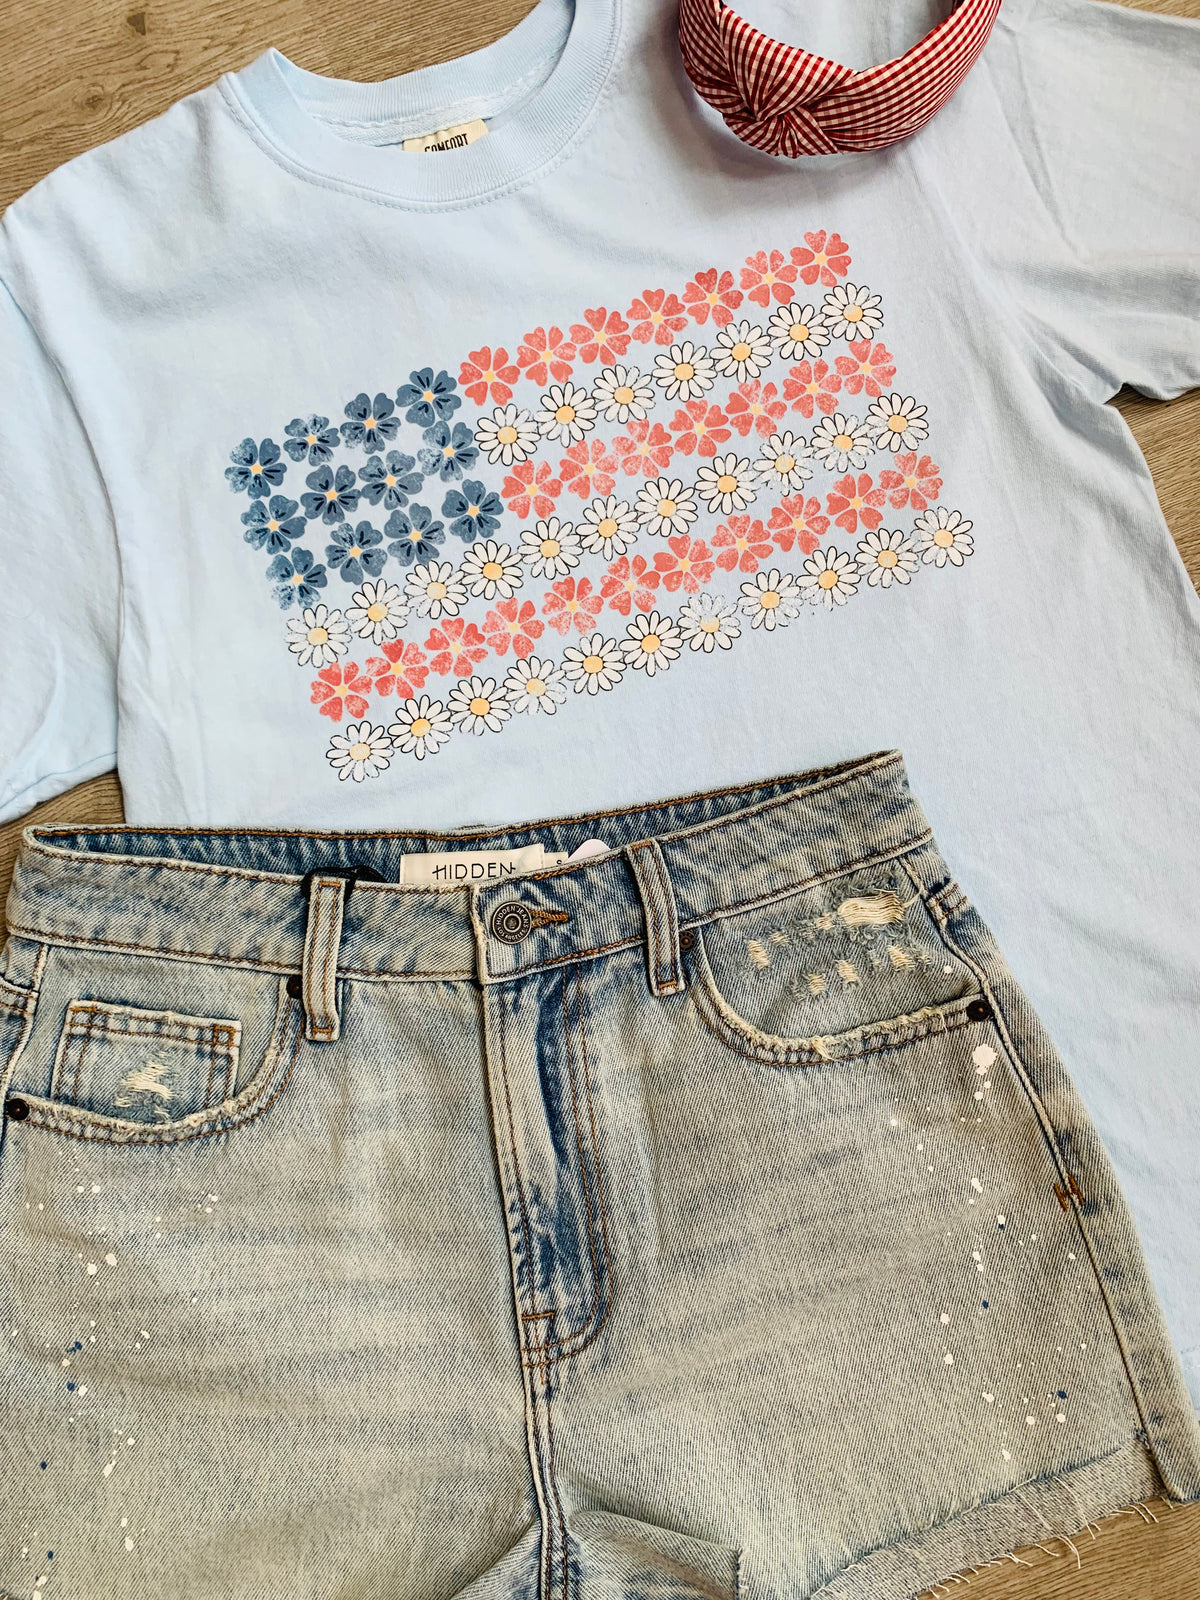 Flowers & Freedom Tee-130 Graphic T's-Peachy Keen Boutique-Peachy Keen Boutique, Women's Fashion Boutique, Located in Cape Girardeau and Dexter, MO